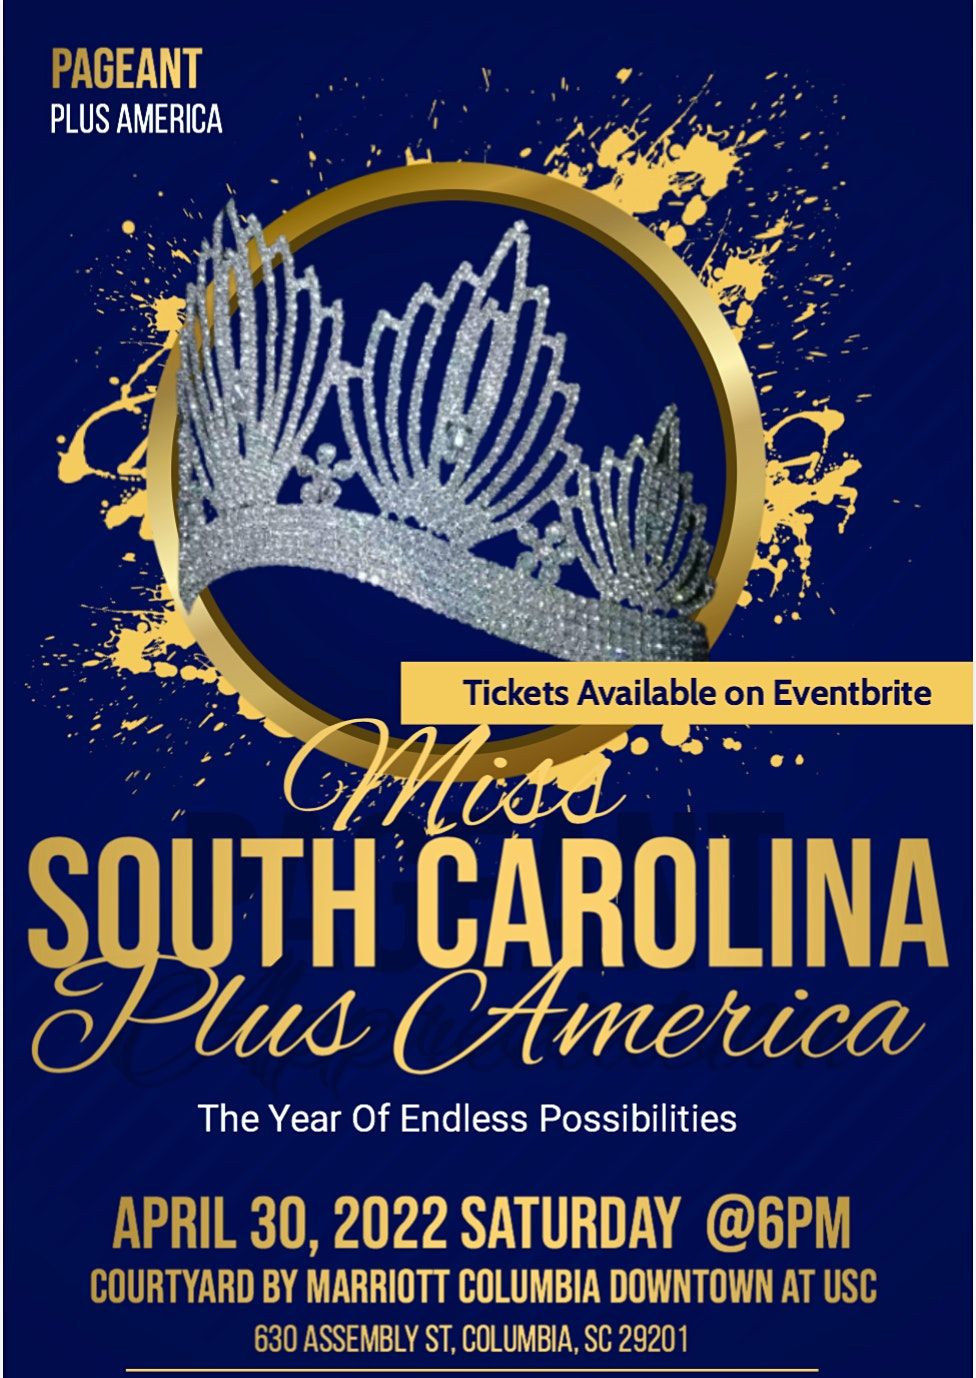 Miss South Carolina Plus America Pageant 2022, Courtyard by Marriott